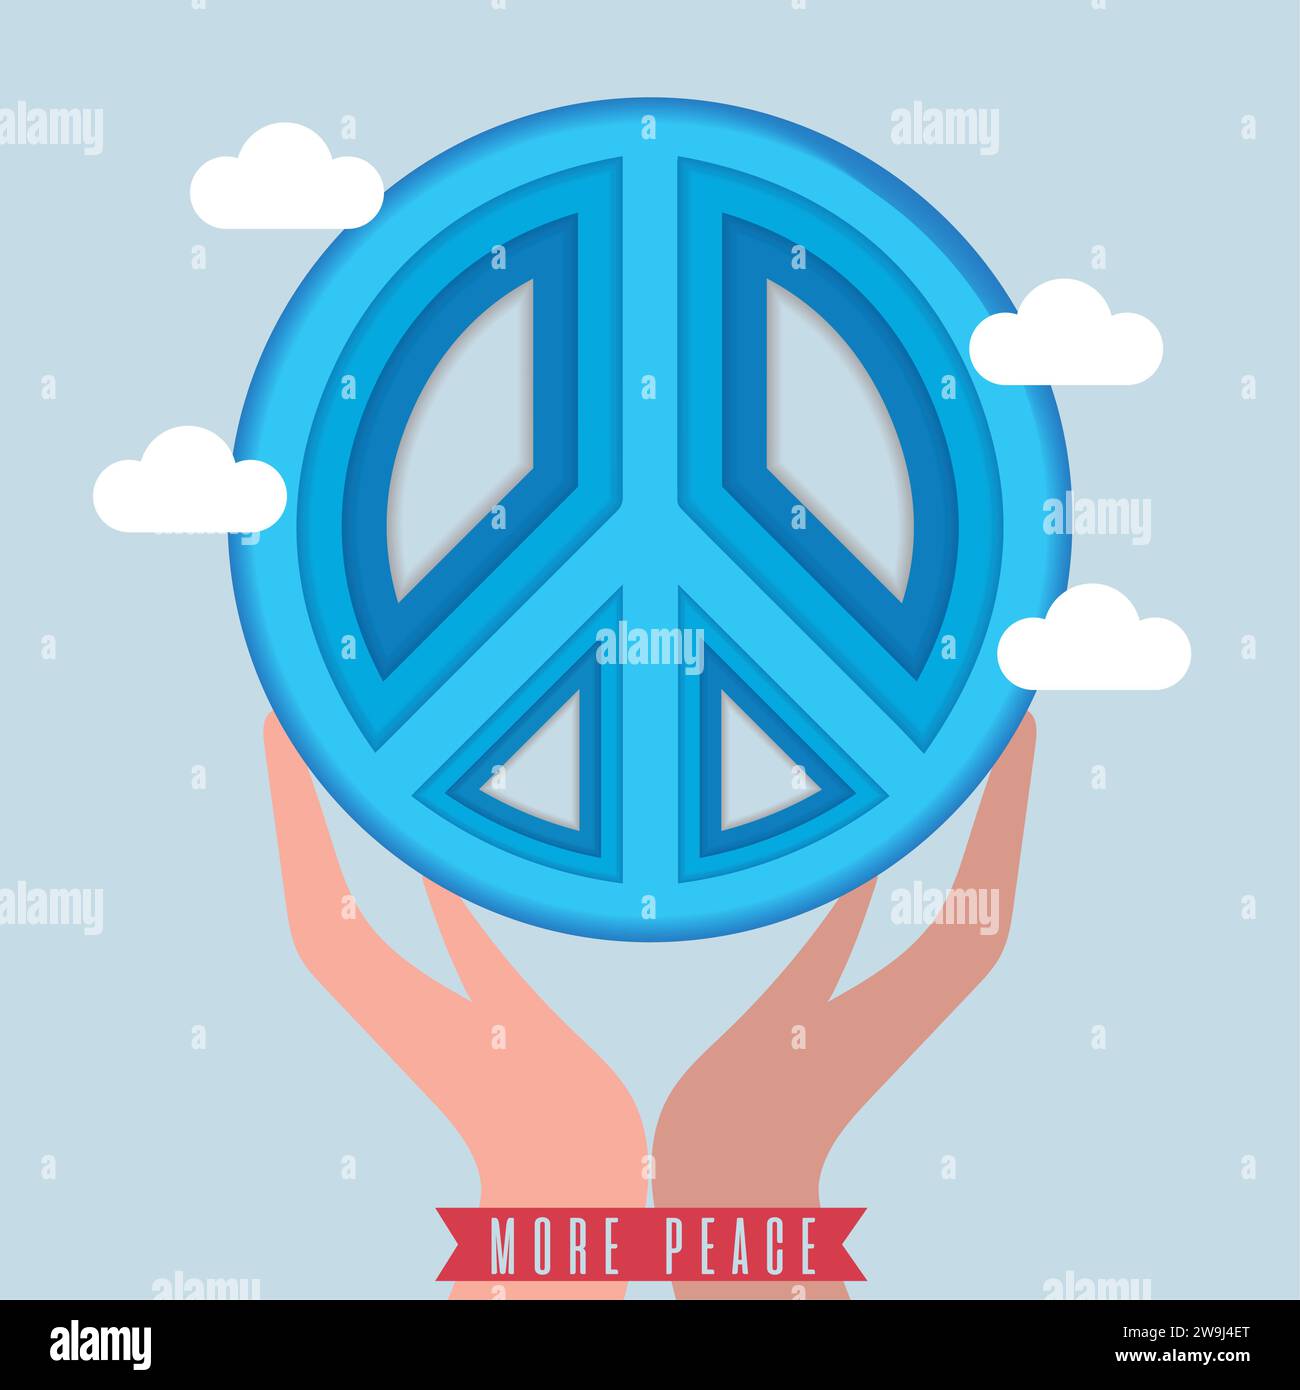 Pair of hands holding a peace symbol Vector Stock Vector